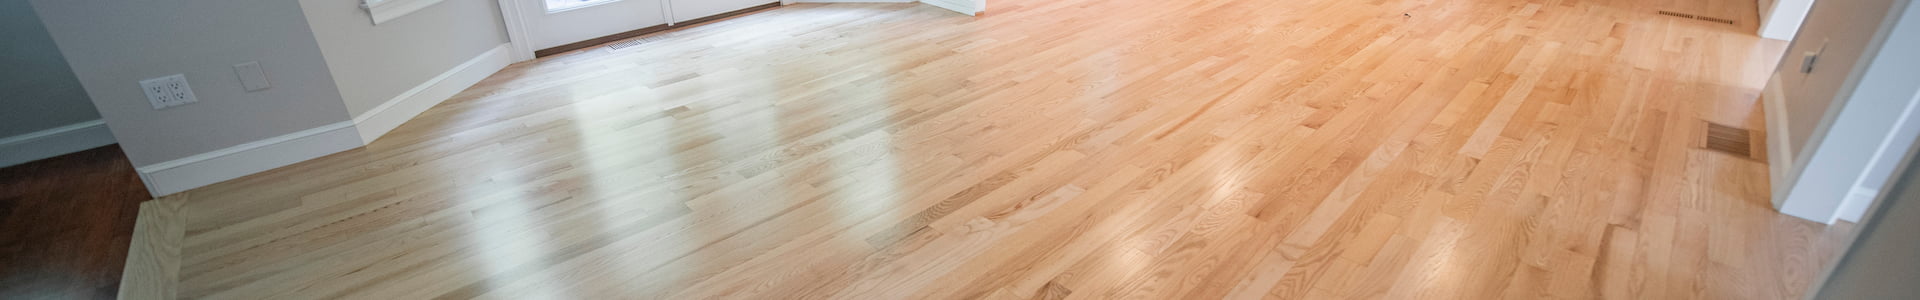 Panoramic view of a residential room with a newly installed light hardwood floor by Weles, displaying a smooth, natural wood texture and quality craftsmanship, enhancing the room’s bright and inviting atmosphere.